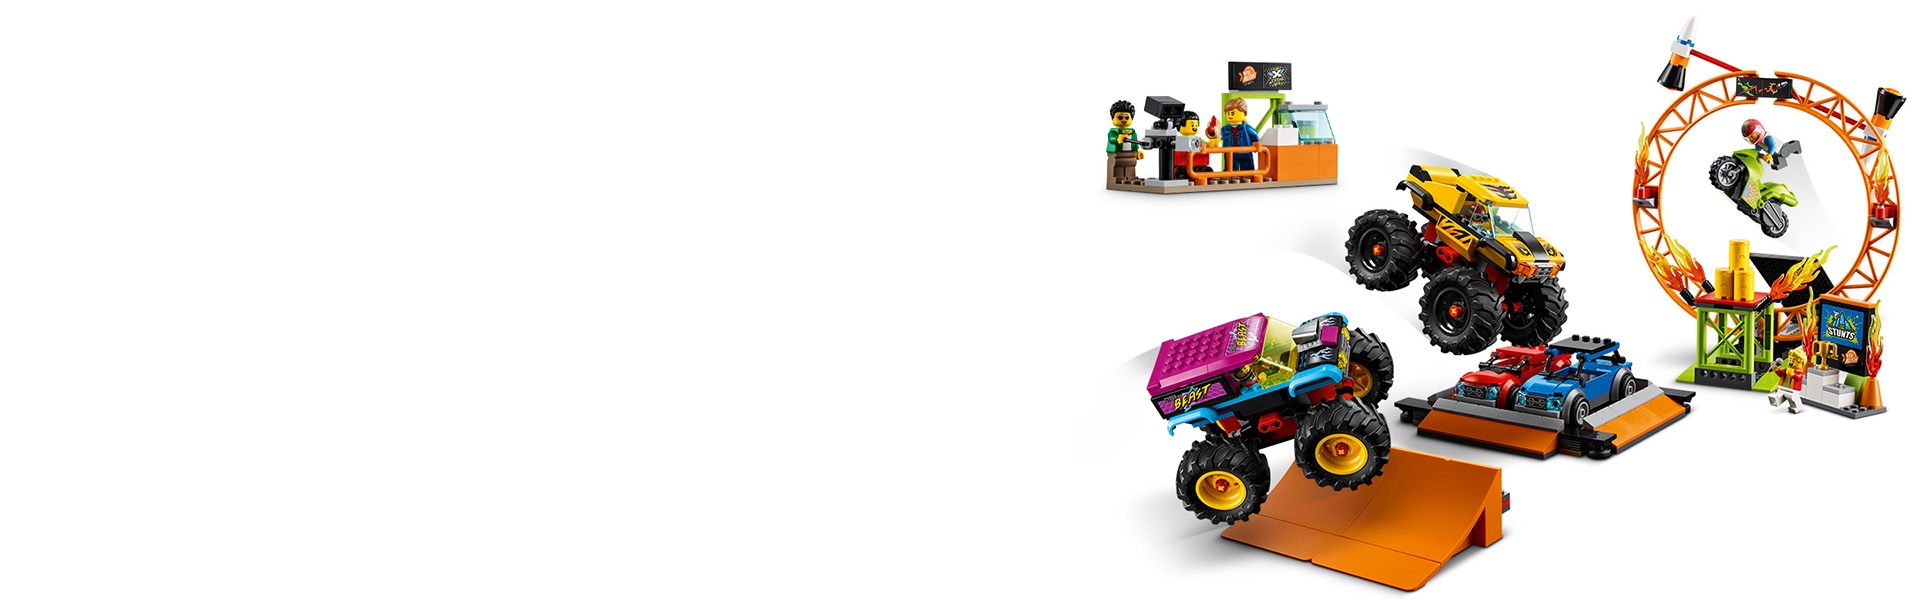 Stunt Show Arena 60295 | City | Buy online at the Official LEGO